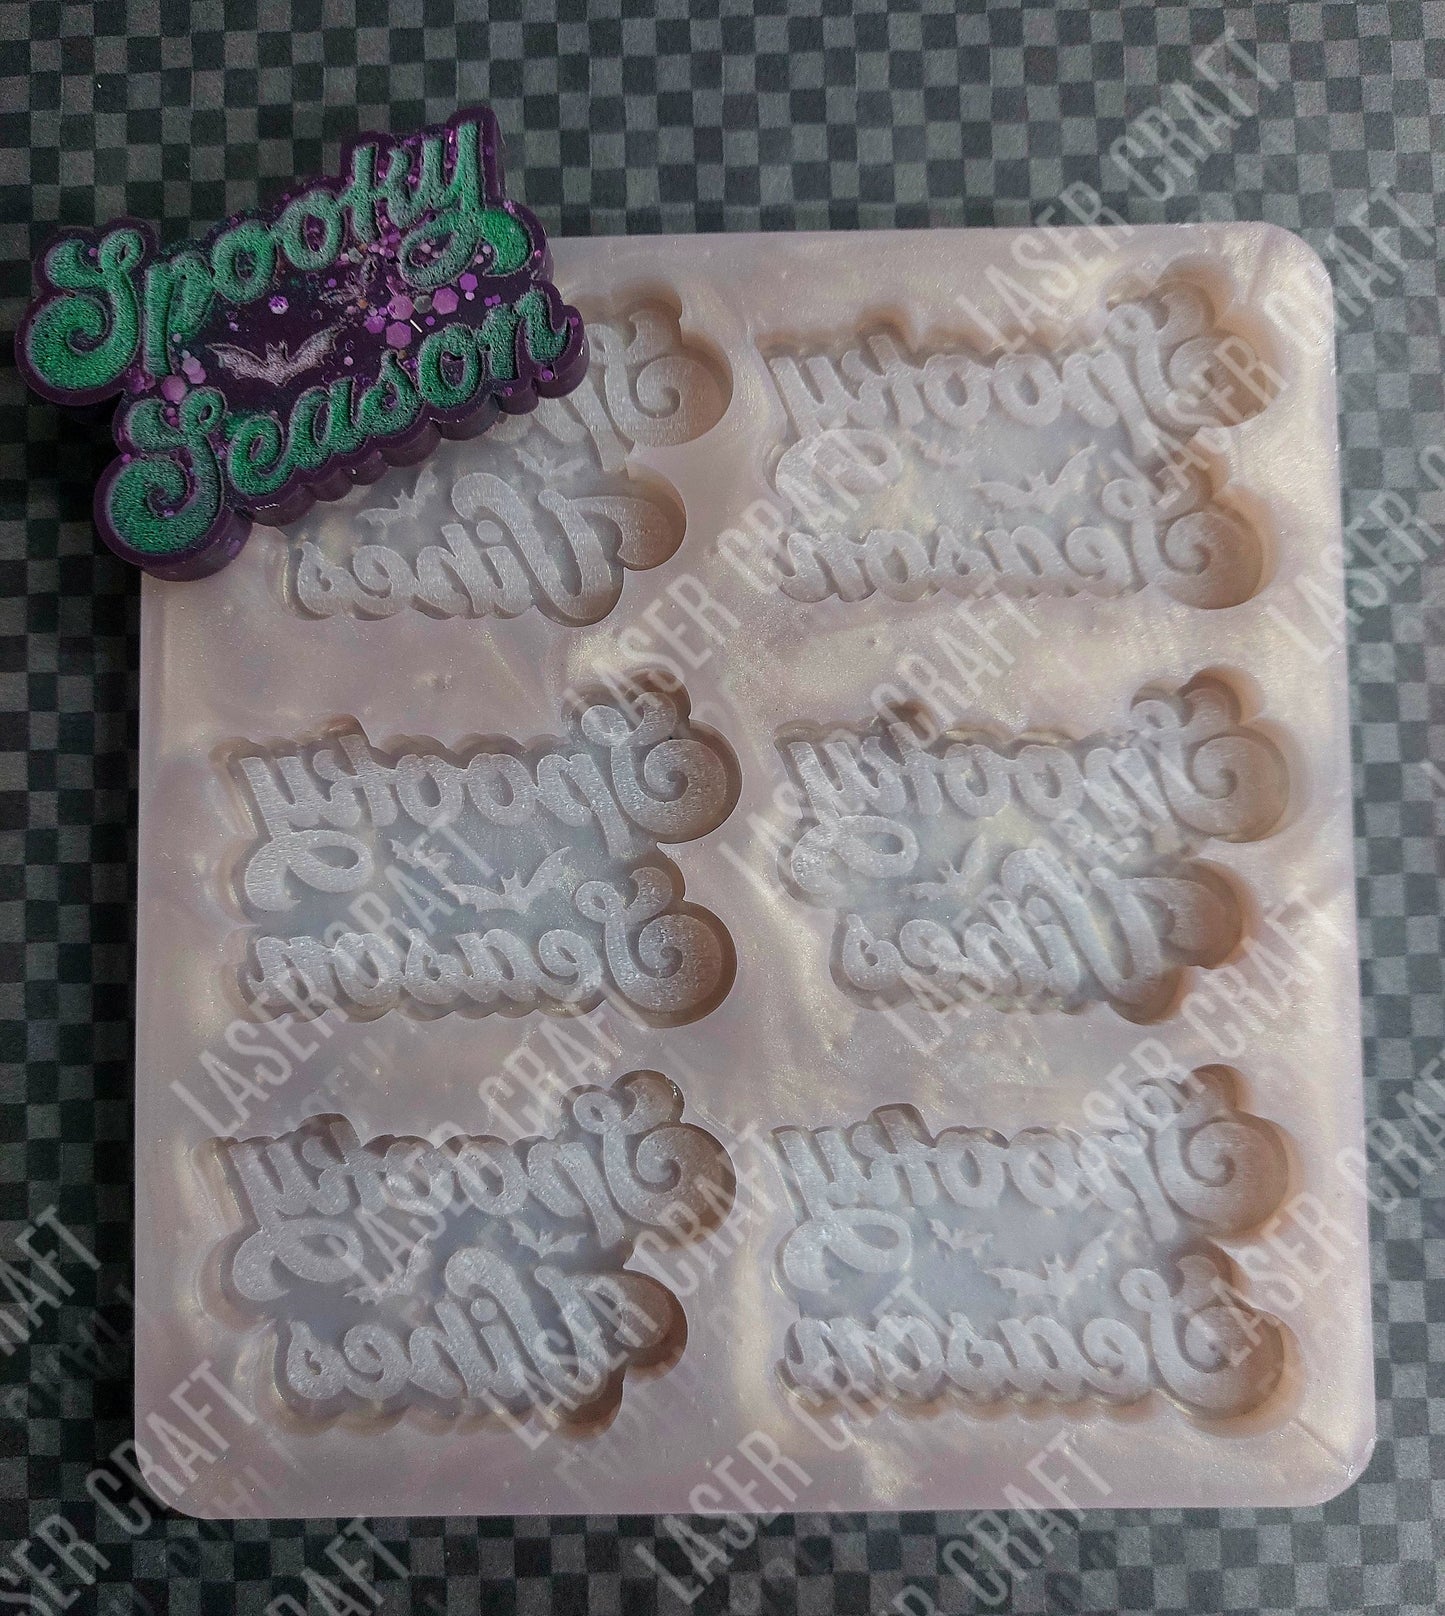 Spooky Season/Spooky Vibes 6 Cell Silicone Mould for wax, soap resin etc